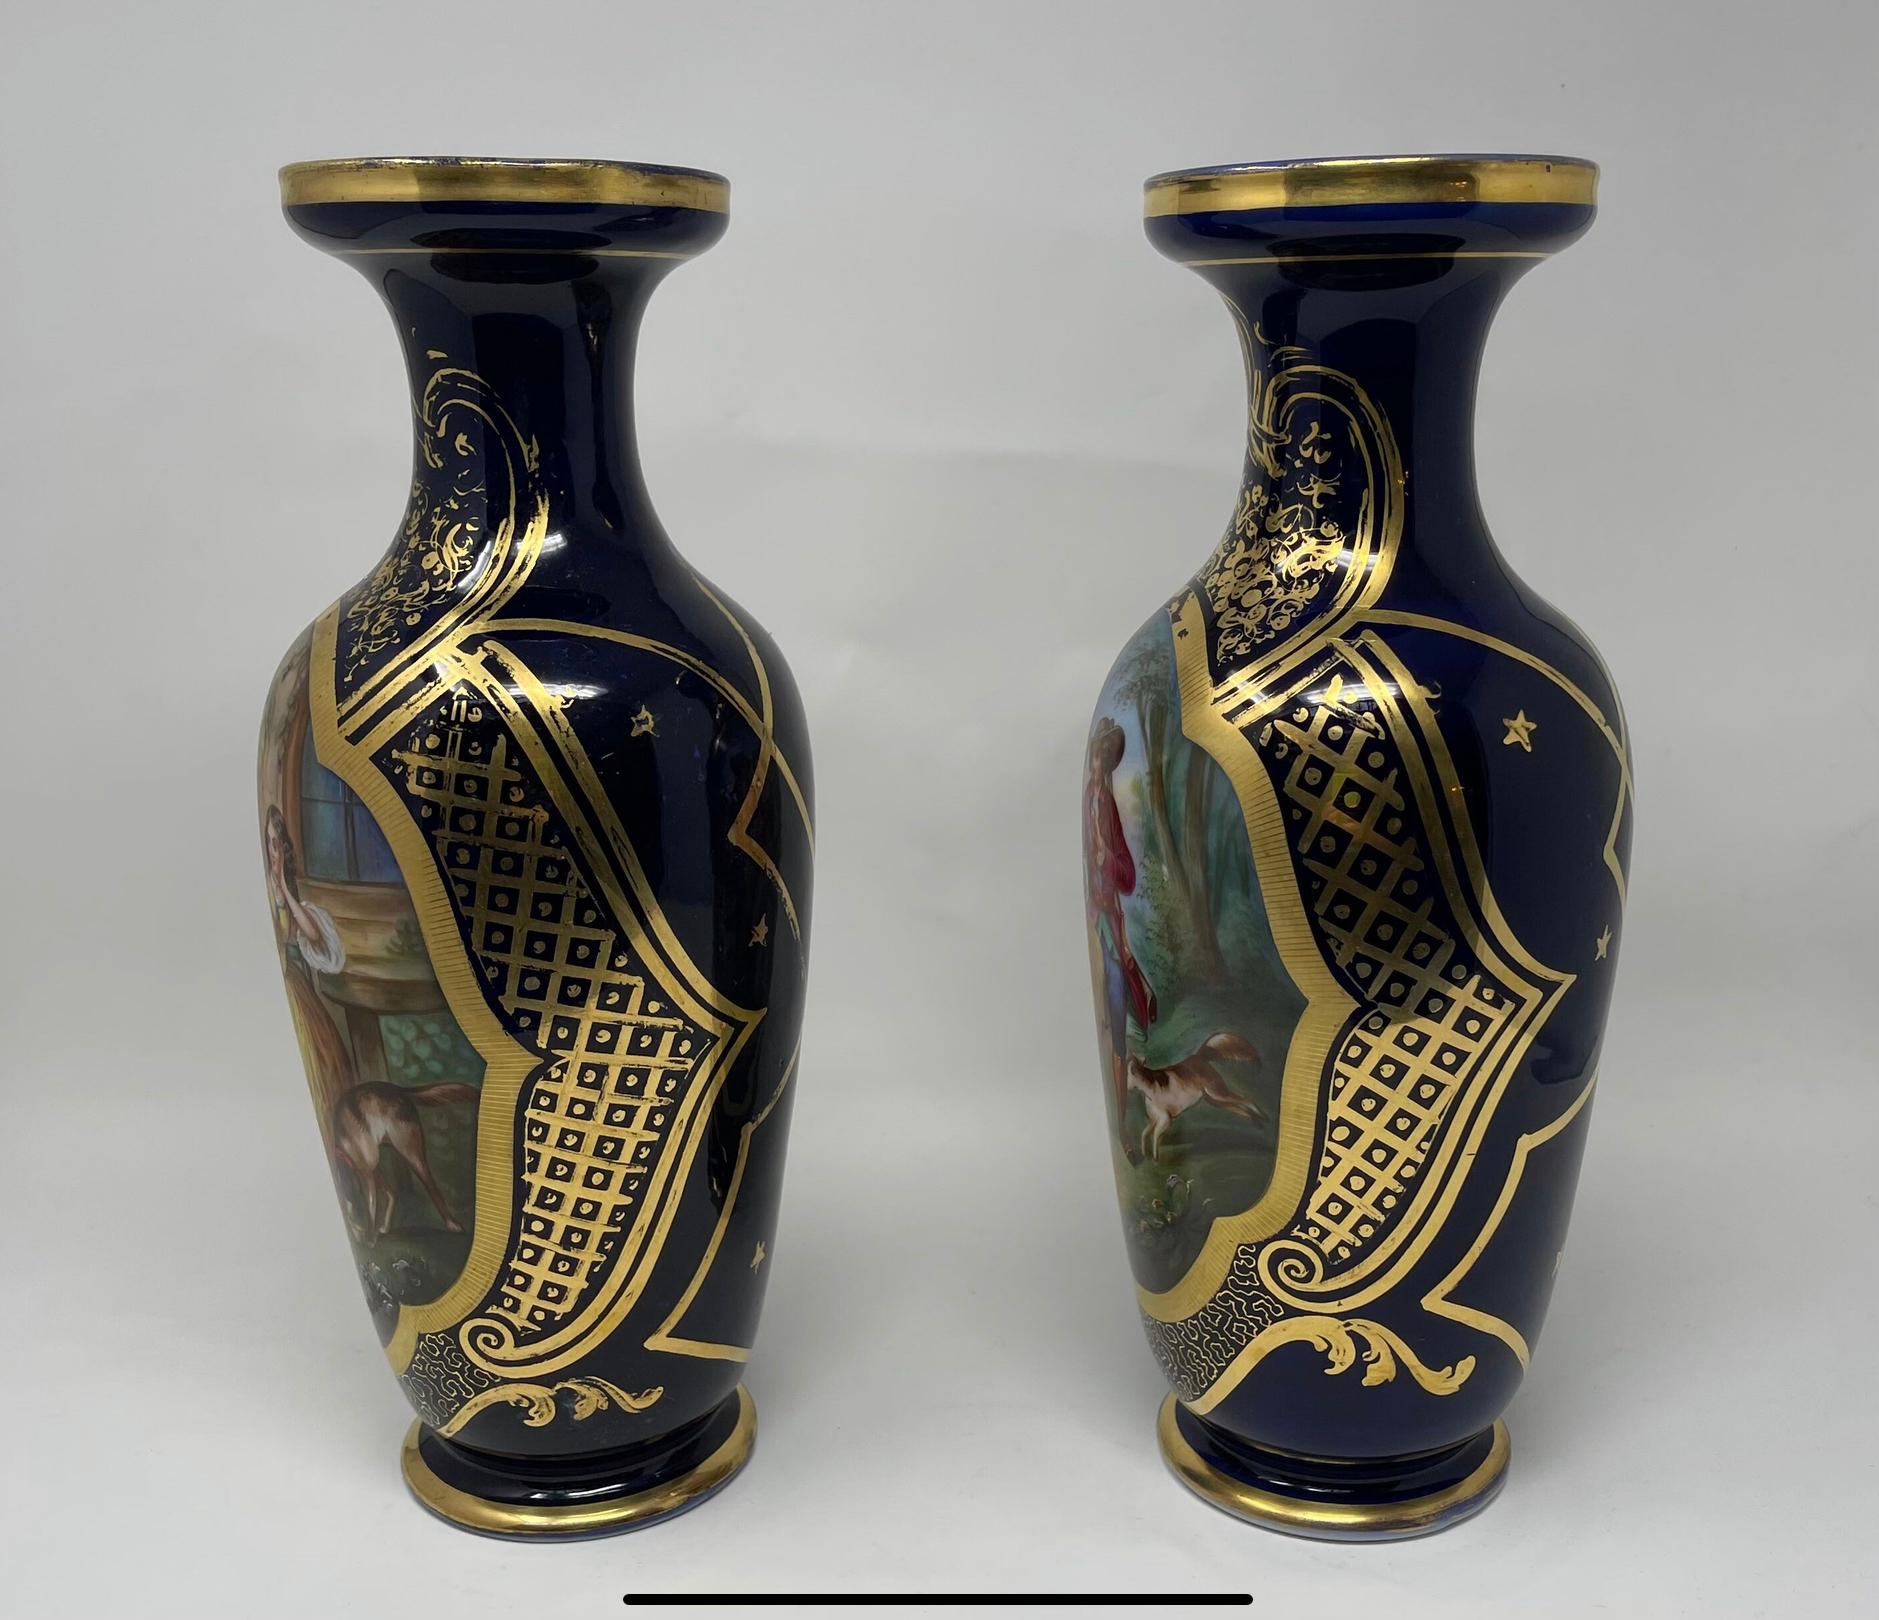 Antique French Gilded Porcelain Vases with Hand Painted Courting Scene - Pair For Sale 3